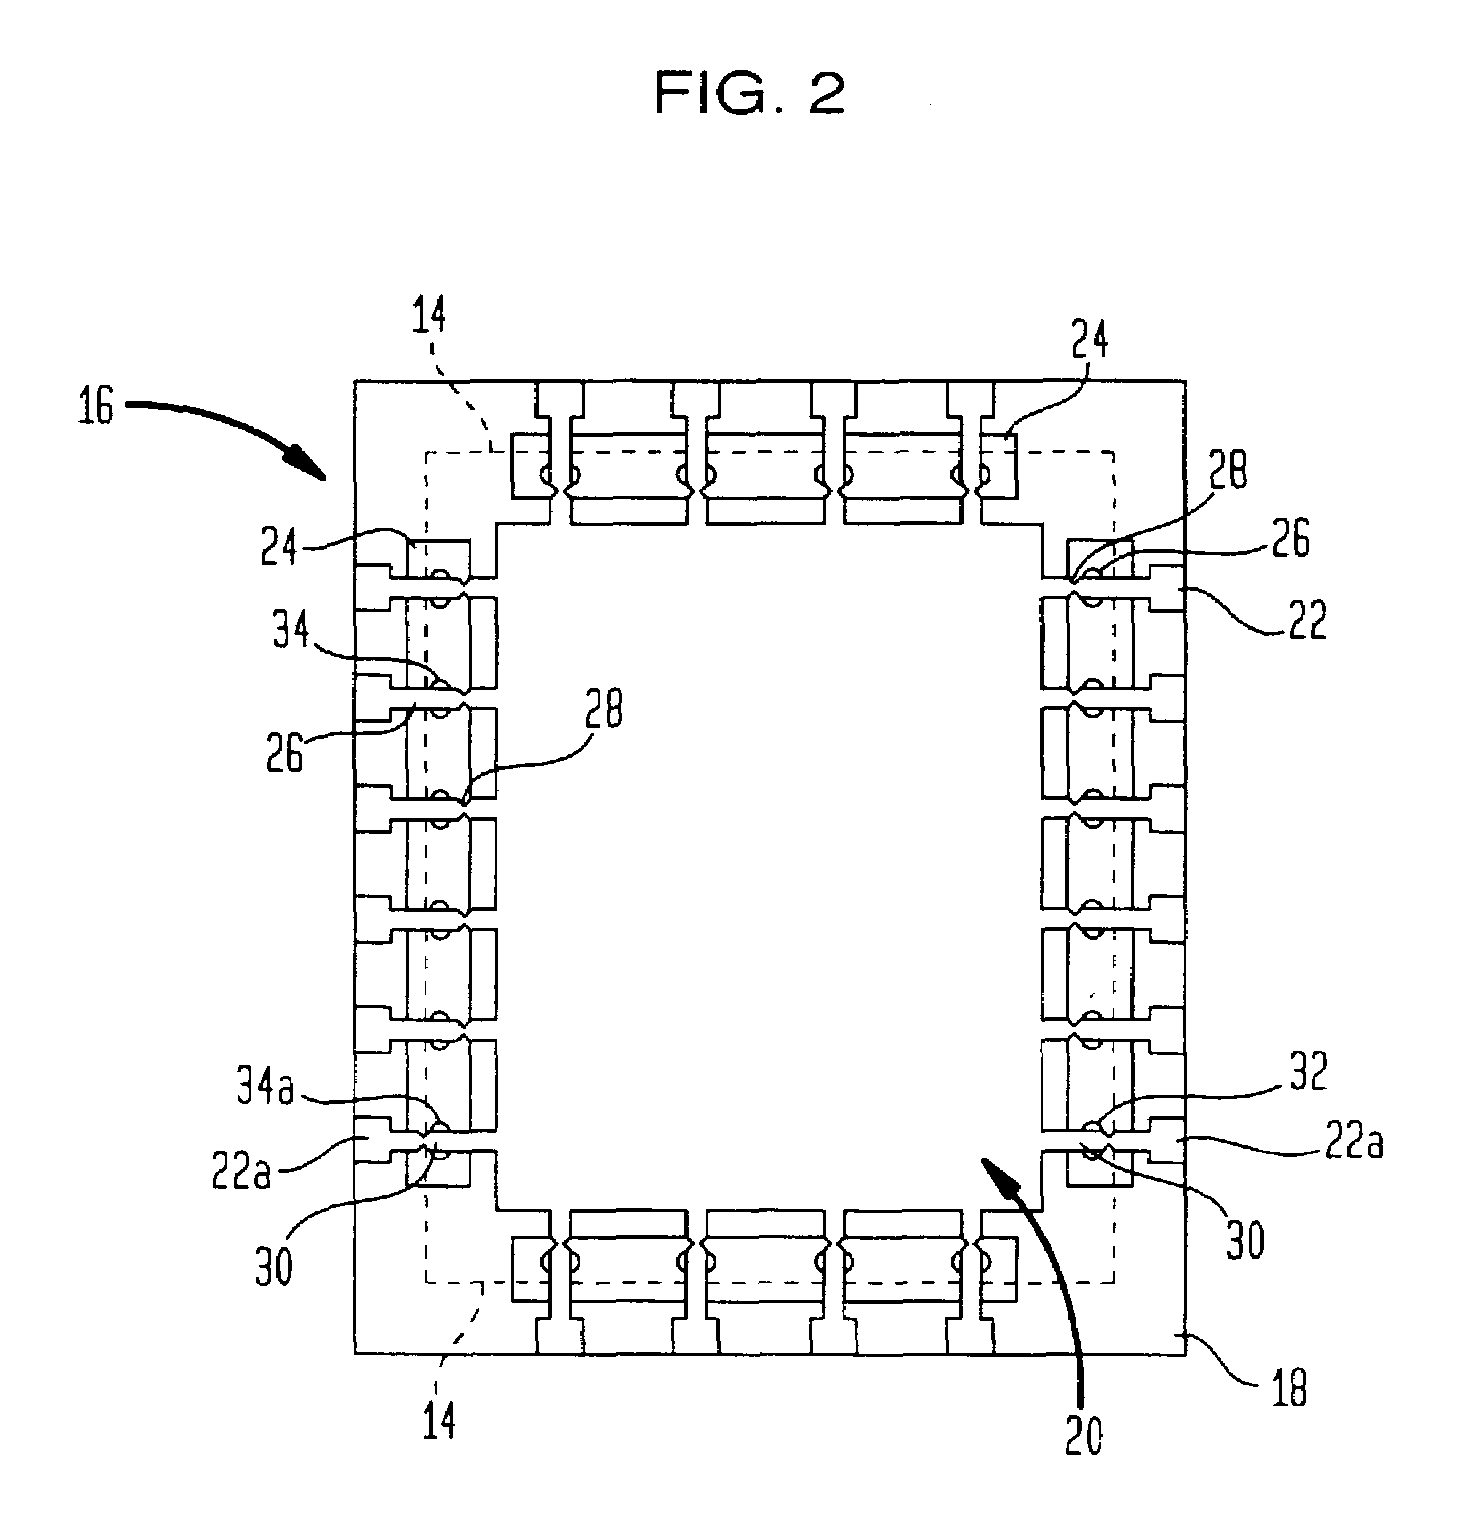 Microelectronic assemblies incorporating inductors